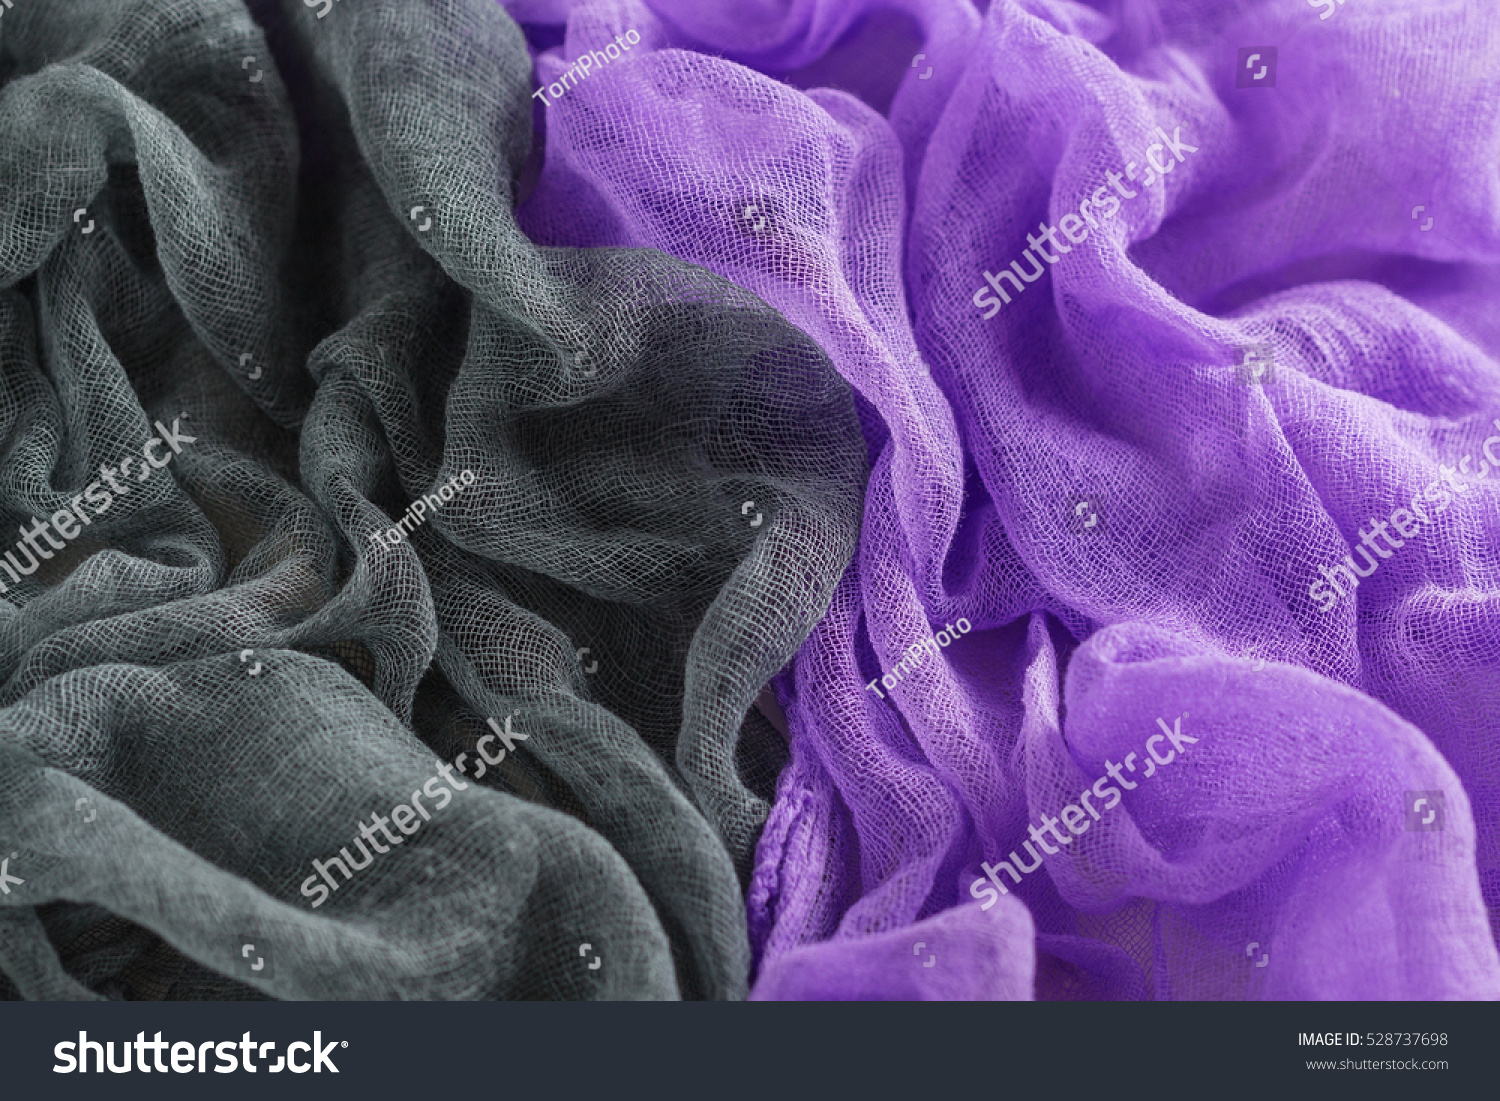 https://www.shutterstock.com/pic-528737698/stock-photo-hand-dyed-gray-and-purple-gauze-fabric-colorful-cloth-texture-background.html